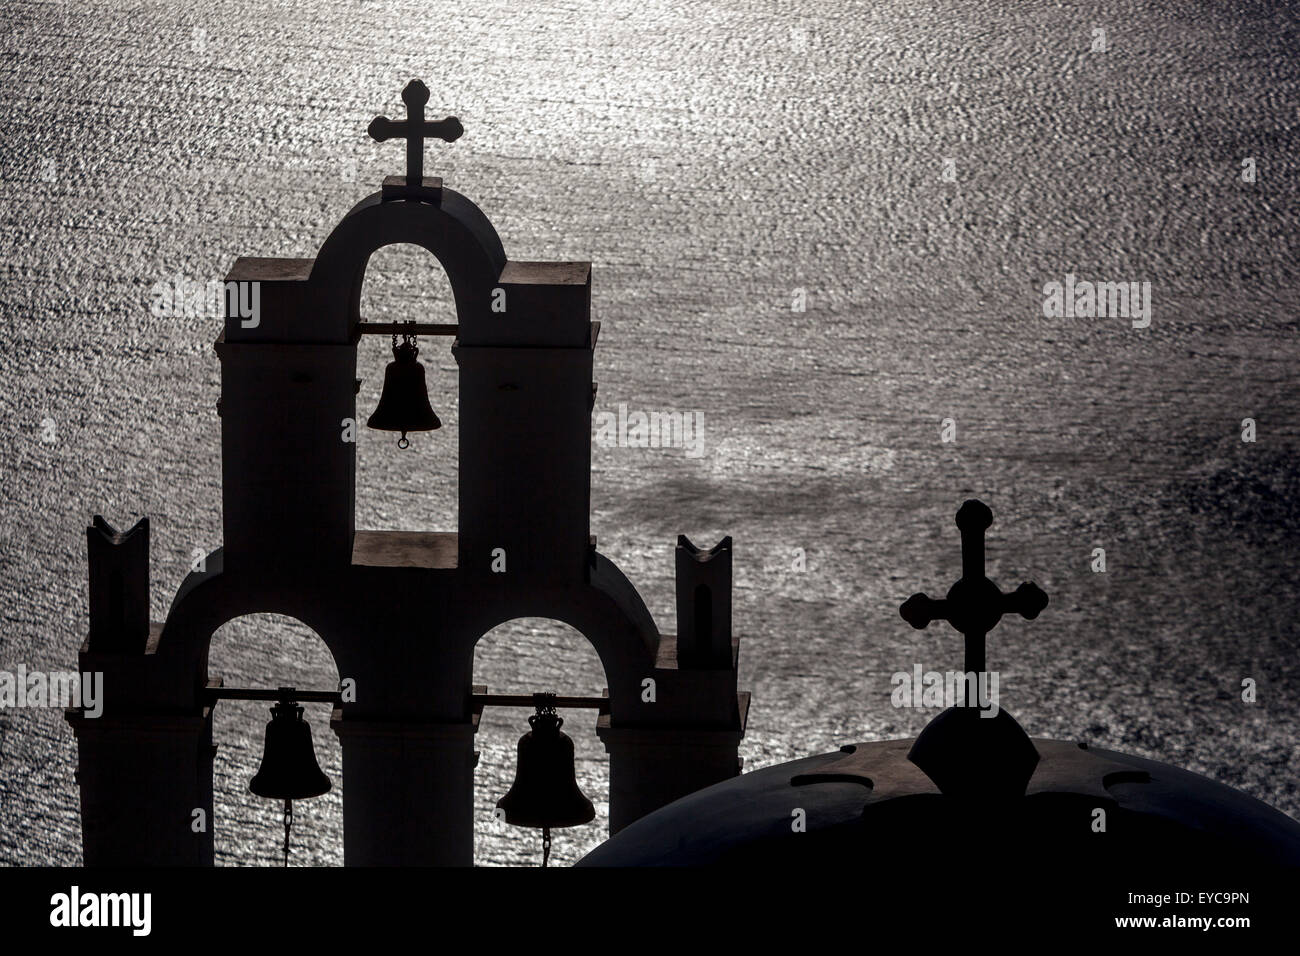 Greece Islands Santorini Greece Church architecture silhouette of a bell tower in the shadows Sea background, sunset church bells Stock Photo